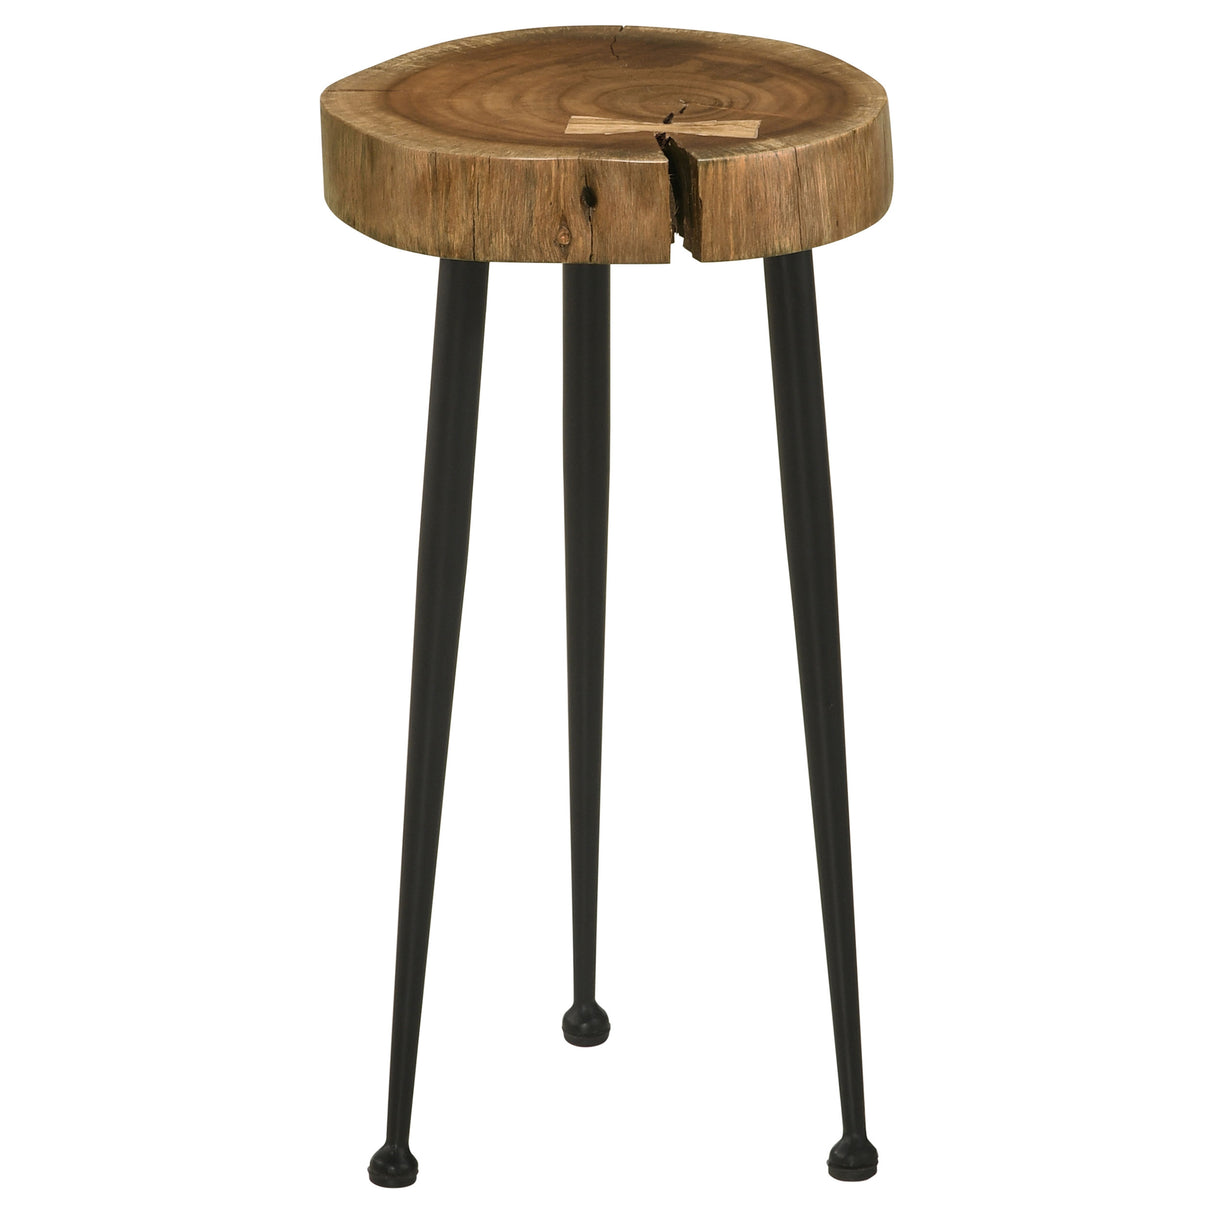 Side Table - Keith Round Wood Top Side Table Natural and Black